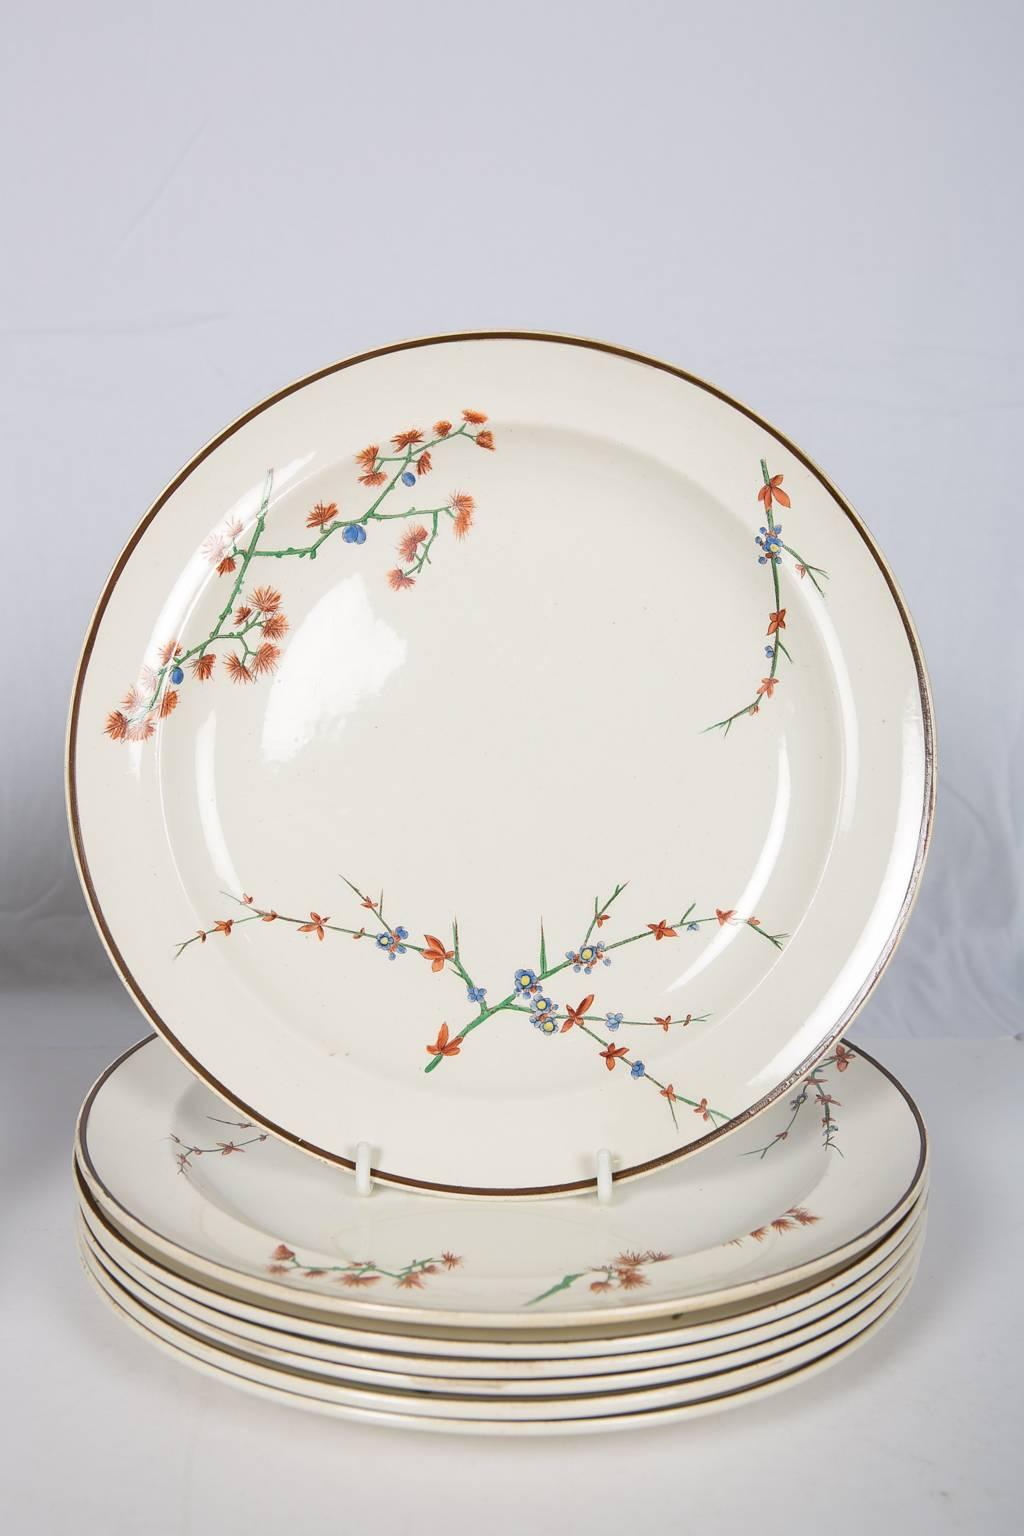 26 Wedgwood Creamware Dinner Plates with Thistle Design Made, circa 1880 For Sale 1